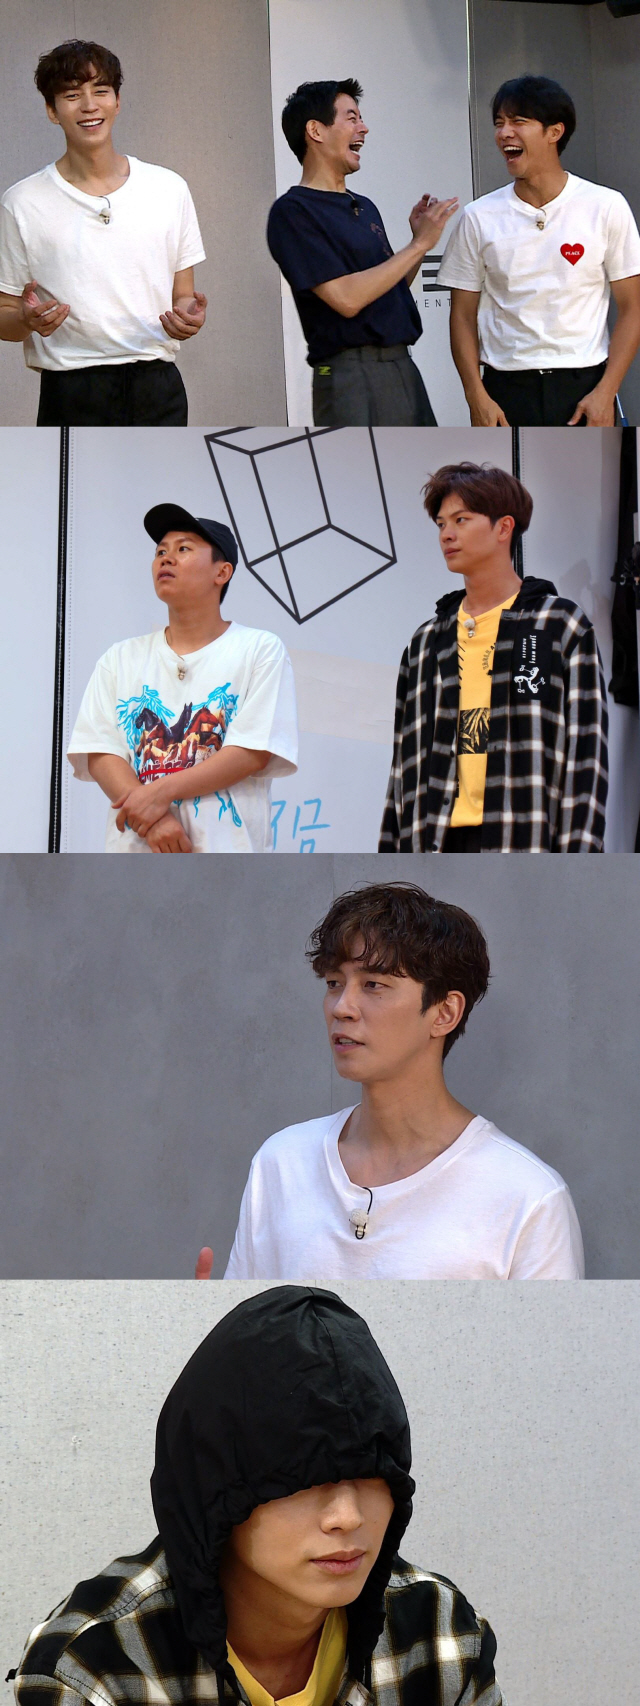 SBS entertainment All The Butlers, which is broadcasted at 6:25 pm today (8th), will have a fierce competition that surpasses survival auditions.All The Butlers Lee Seung-gi, Lee Sang-yoon, Yang Sung-hee, and Yang Se-hyeong entered dance lessons ahead of daily disciple Shin Sung-rok and express mission.When the full-scale practice began with the master, they showed a full-fledged appearance, unlike the ones they were worried about.The dance training began with pride, and the members began to compete fiercely, rendering the passion as much as the professionals, and reminiscent of survival auditions.Even I seem to be doing better than him, he said, checking the same team members and laughing at the explosion of the game.Shin Sung-rok, who was selected as the head of the dance school, played an active role in the unstoppable gesture.Shin Sung-rok is the back door that made the master and the scene into a laughing sea by constantly saying the suggestions that are somewhat contrasted with the profound voice throughout the practice.Shin Sung-rok, a daily student who became the head of the dance school, can be found at All The Butlers broadcasted at 6:25 pm on the 8th.